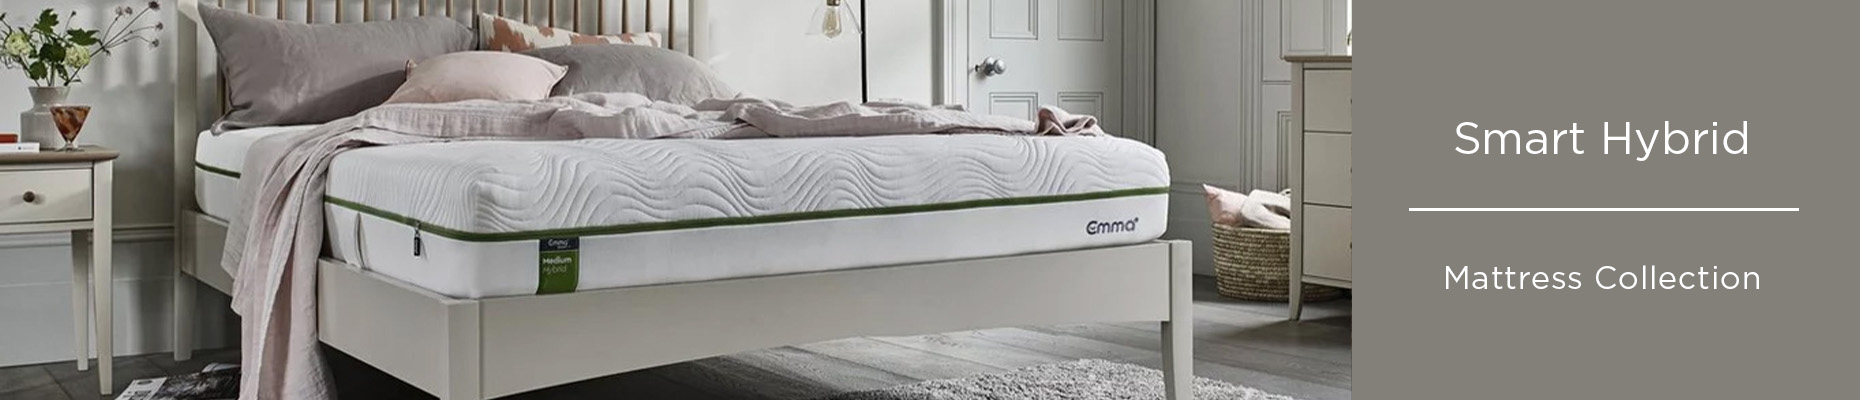 Smart Hybrid collection from Emma Sleep at Forrest Furnishing